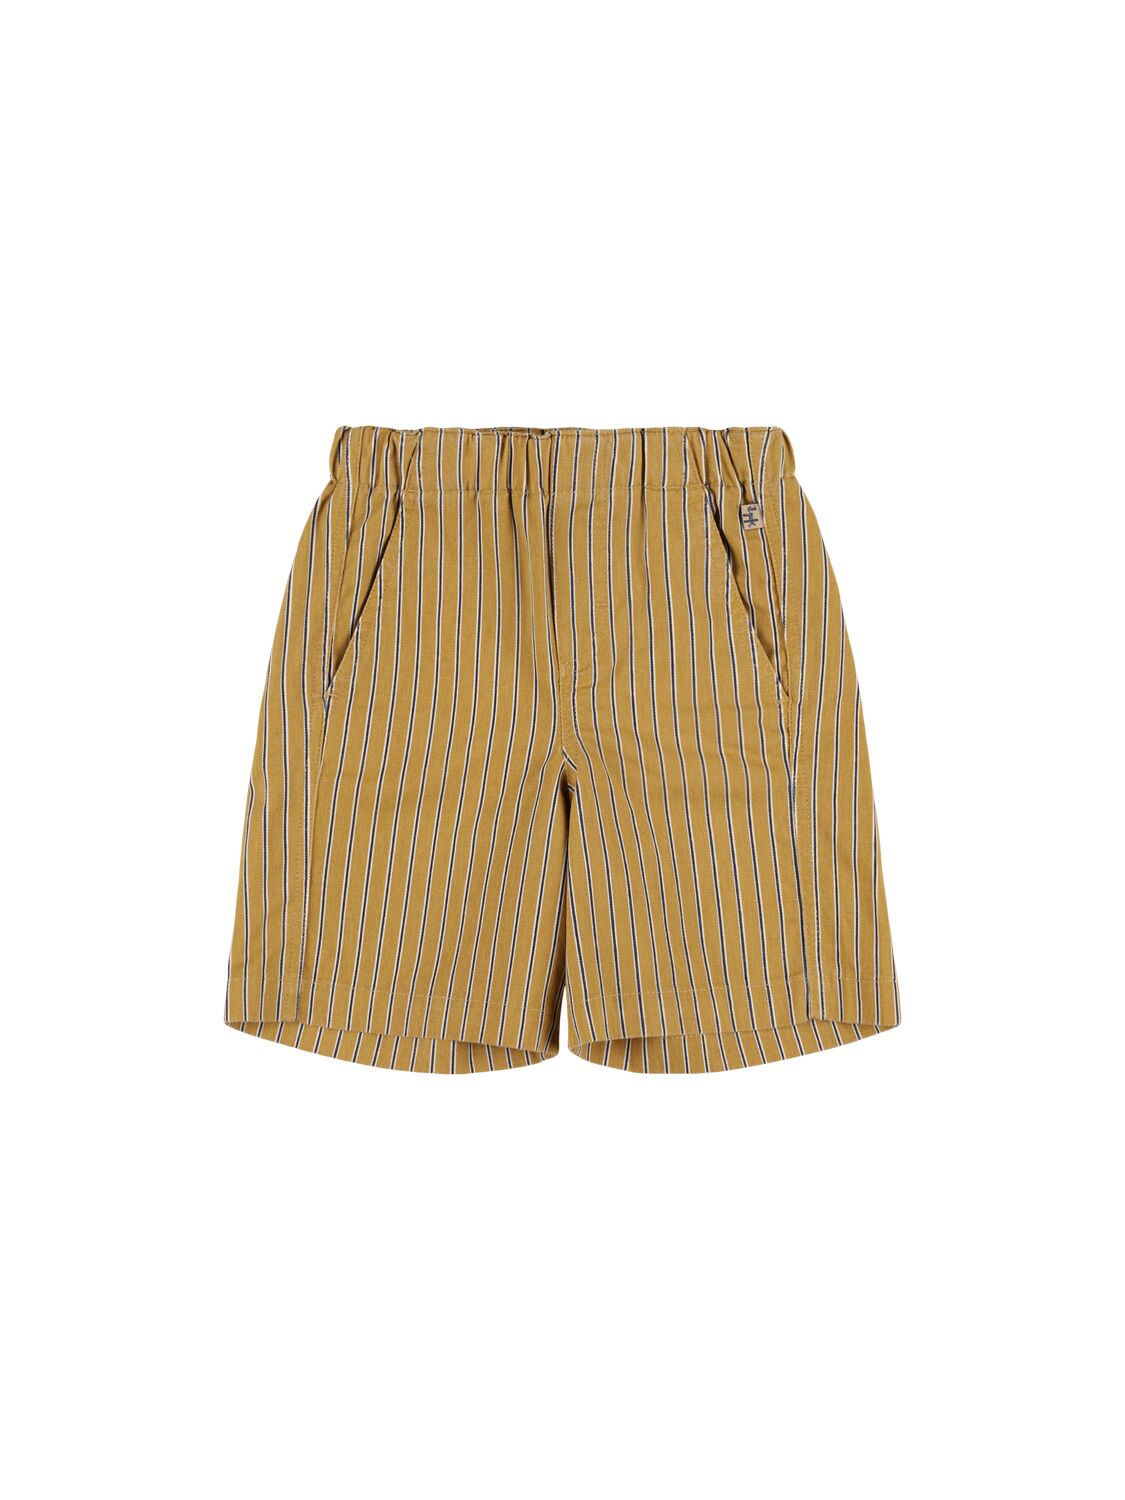 Image of Cotton Striped Shorts